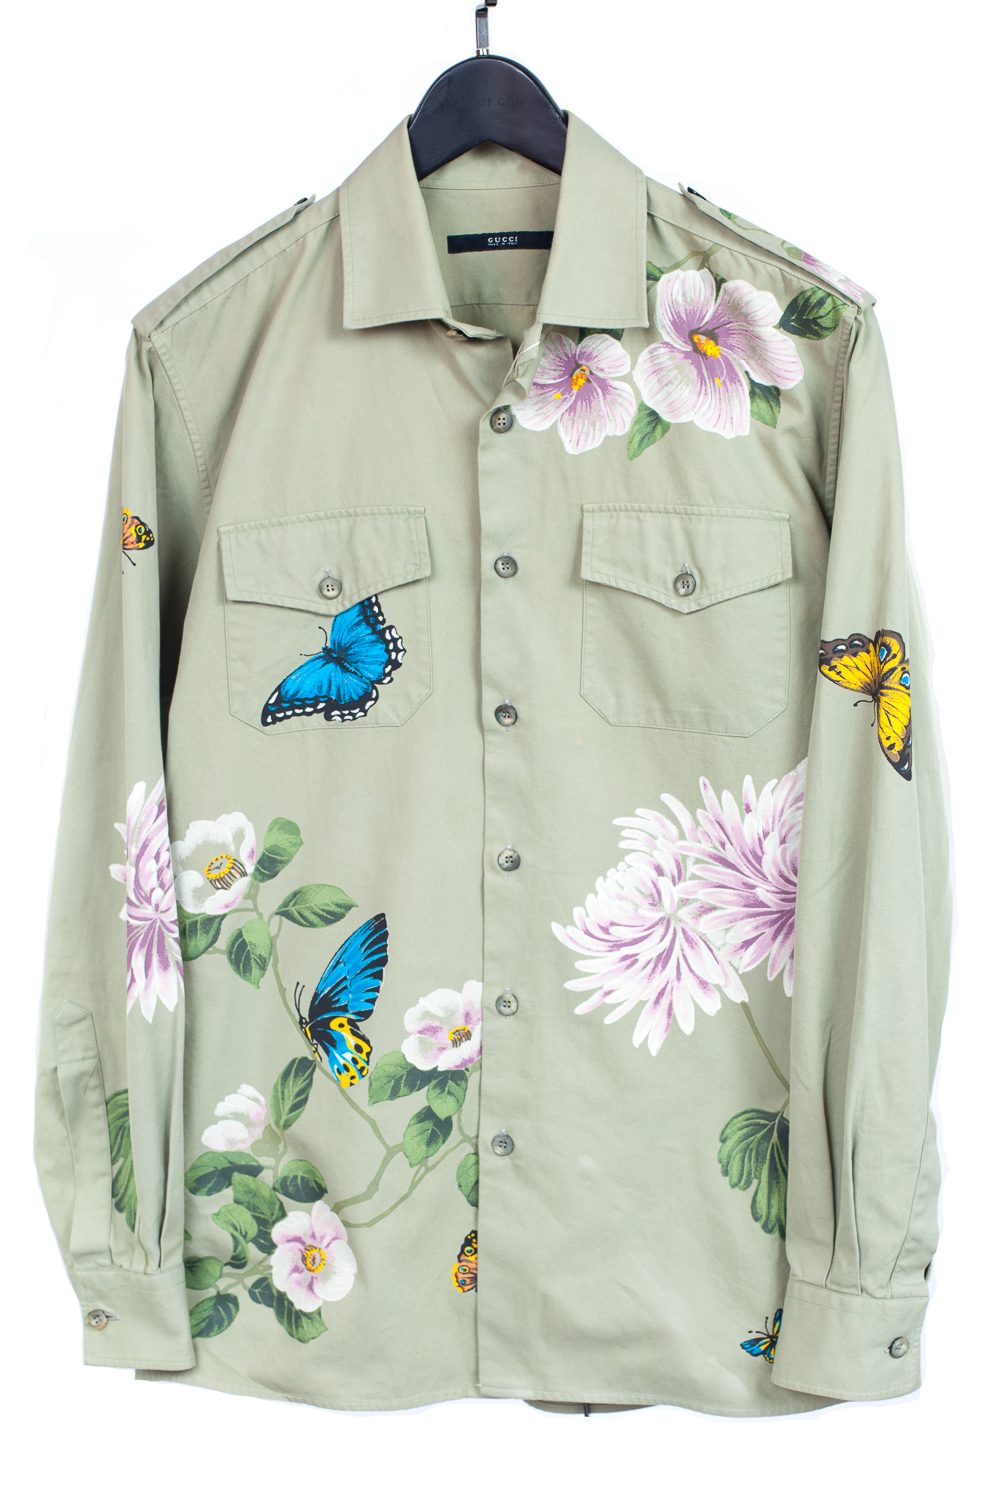 Tom Ford Era Hand Painted Floral Camp Shirt